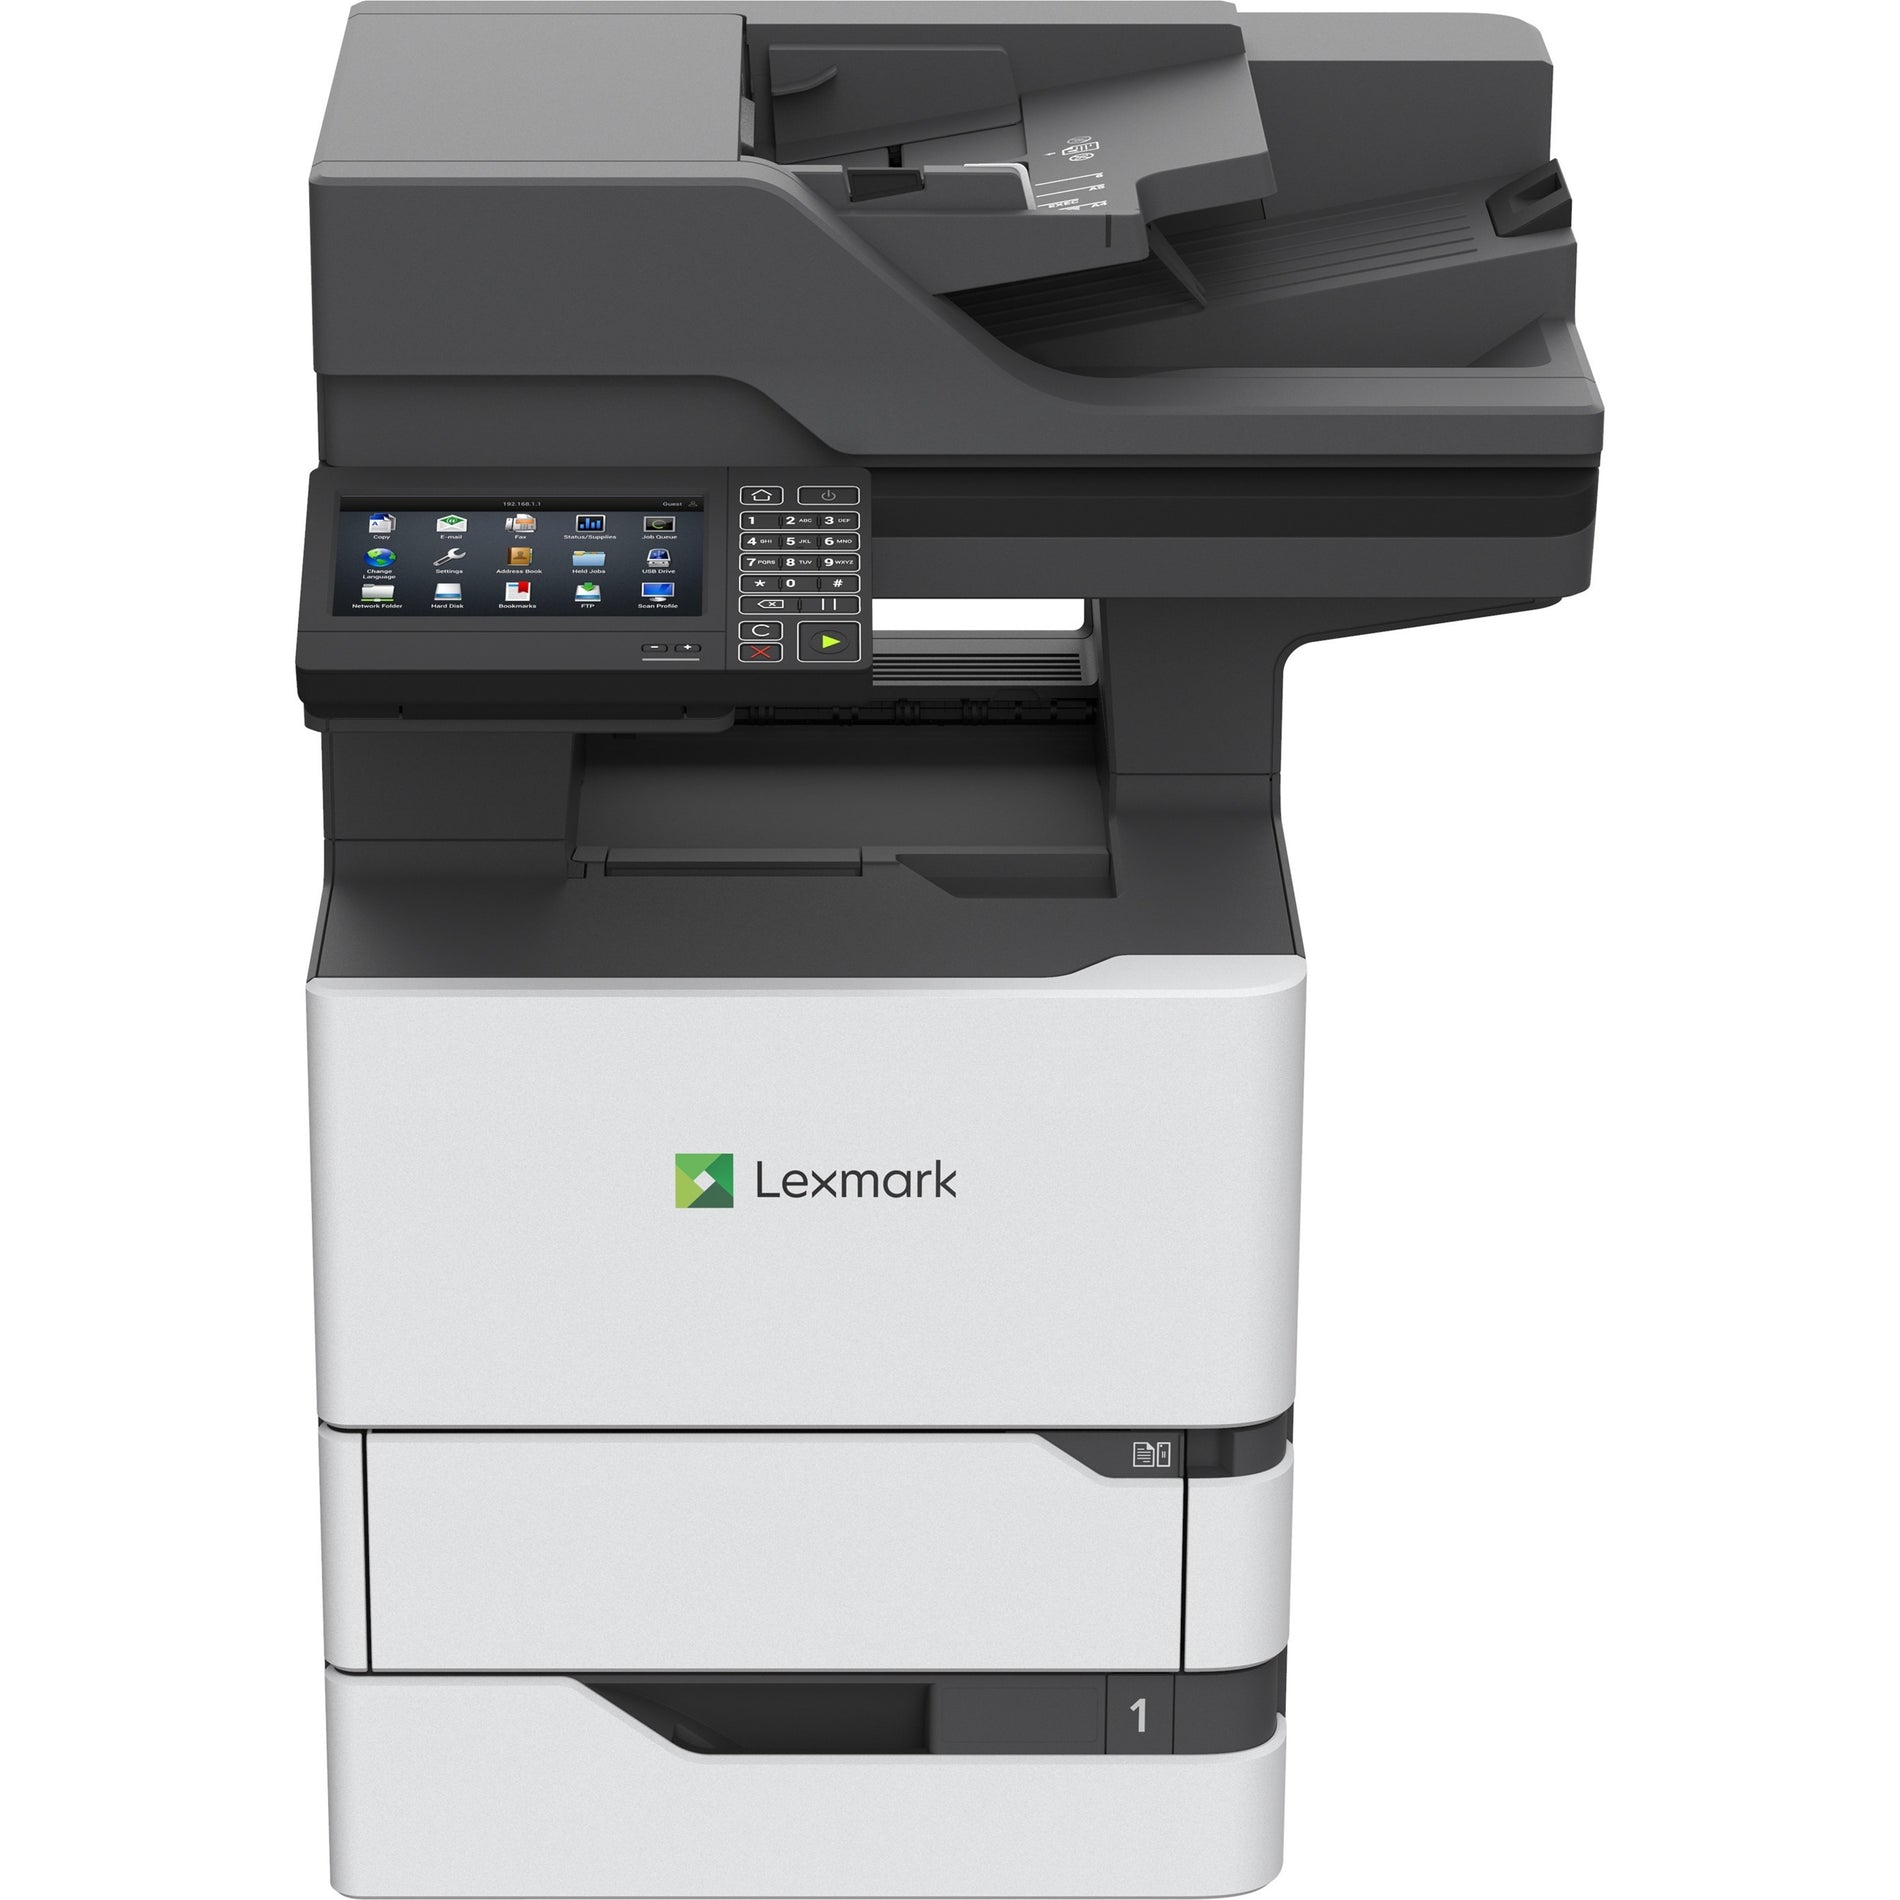 Lexmark 25B0002 MX722ade Multifunction Laser Printer, Up to 70 ppm, Large Workgroup Performance